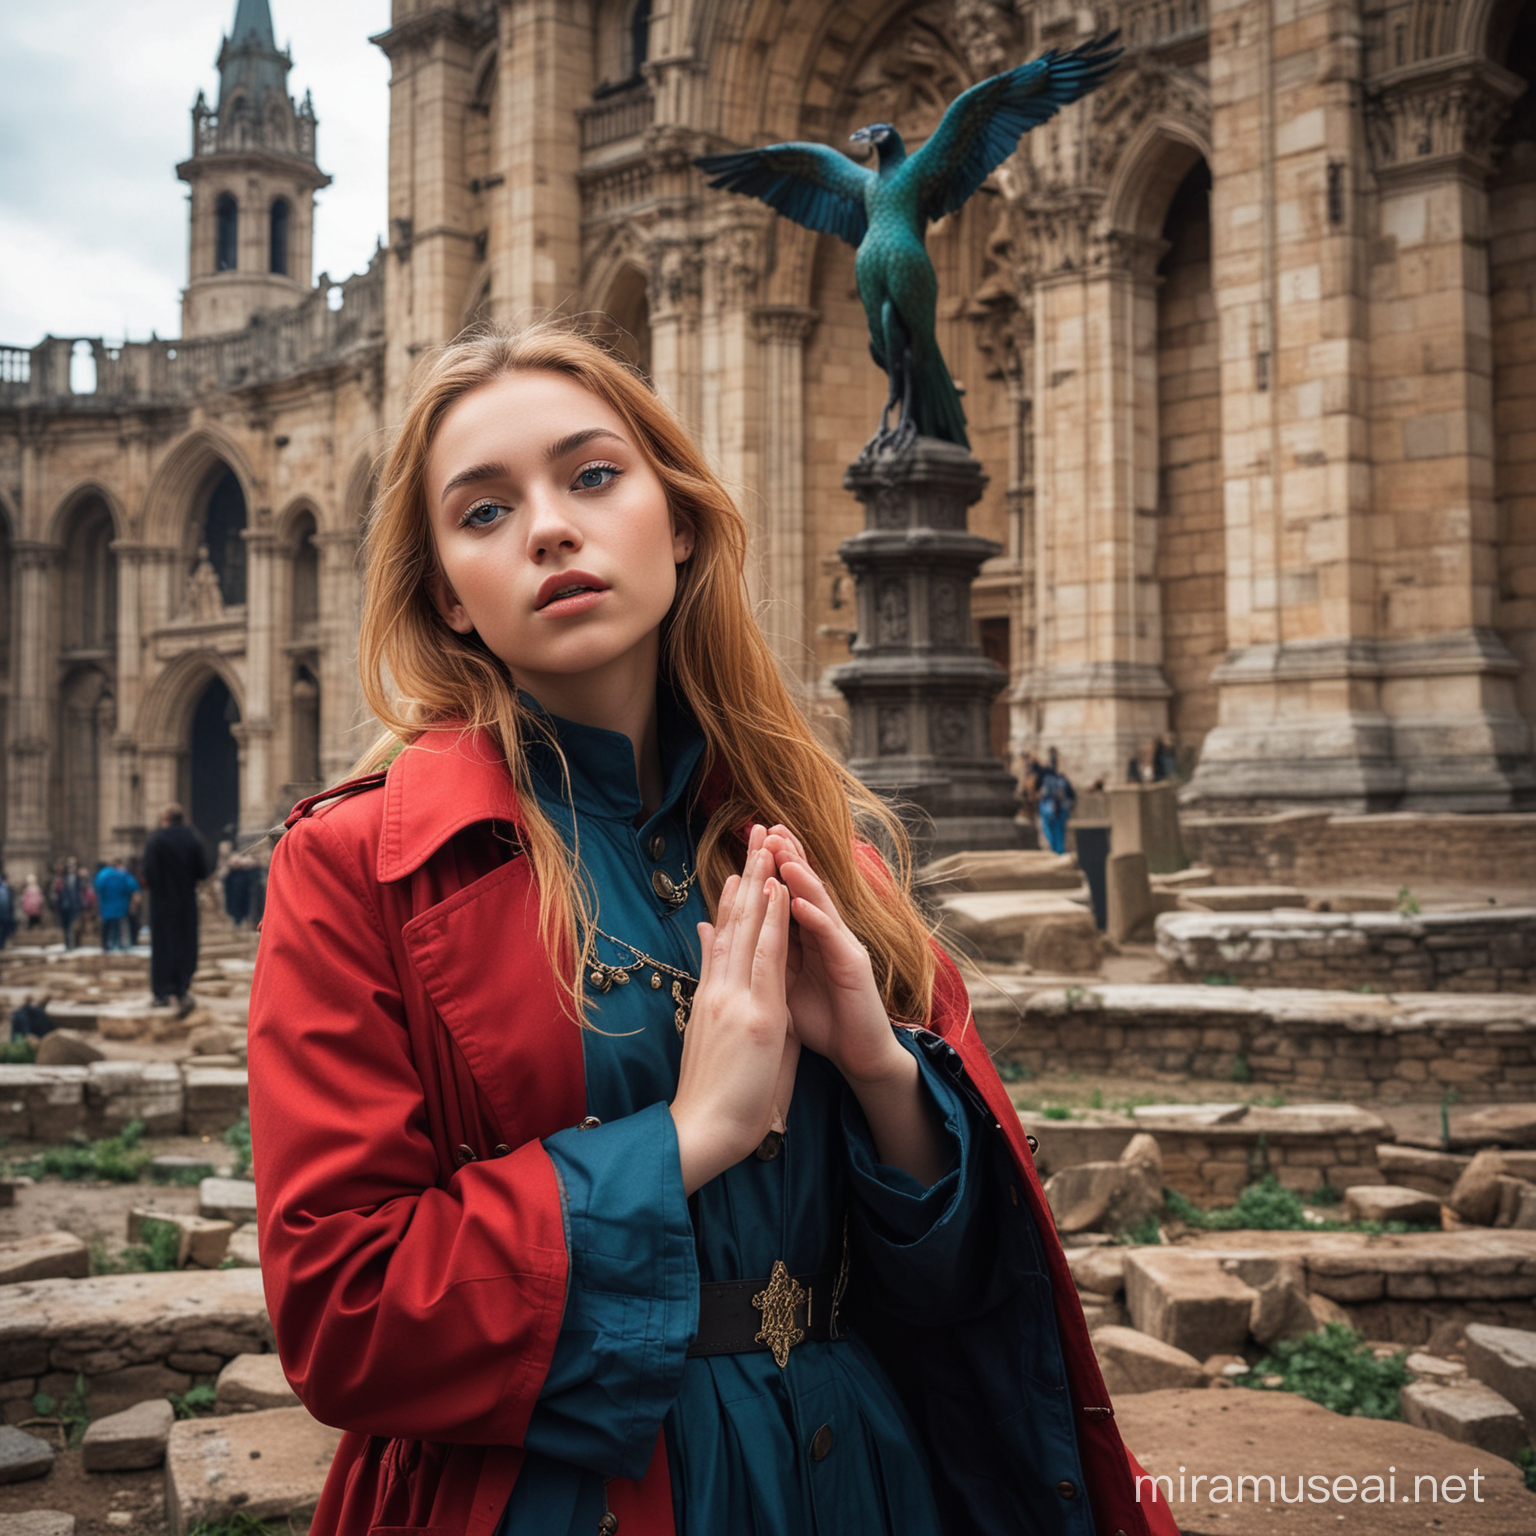 Mystical Teenage Goddess with Peacock and Bloodied Crucifix